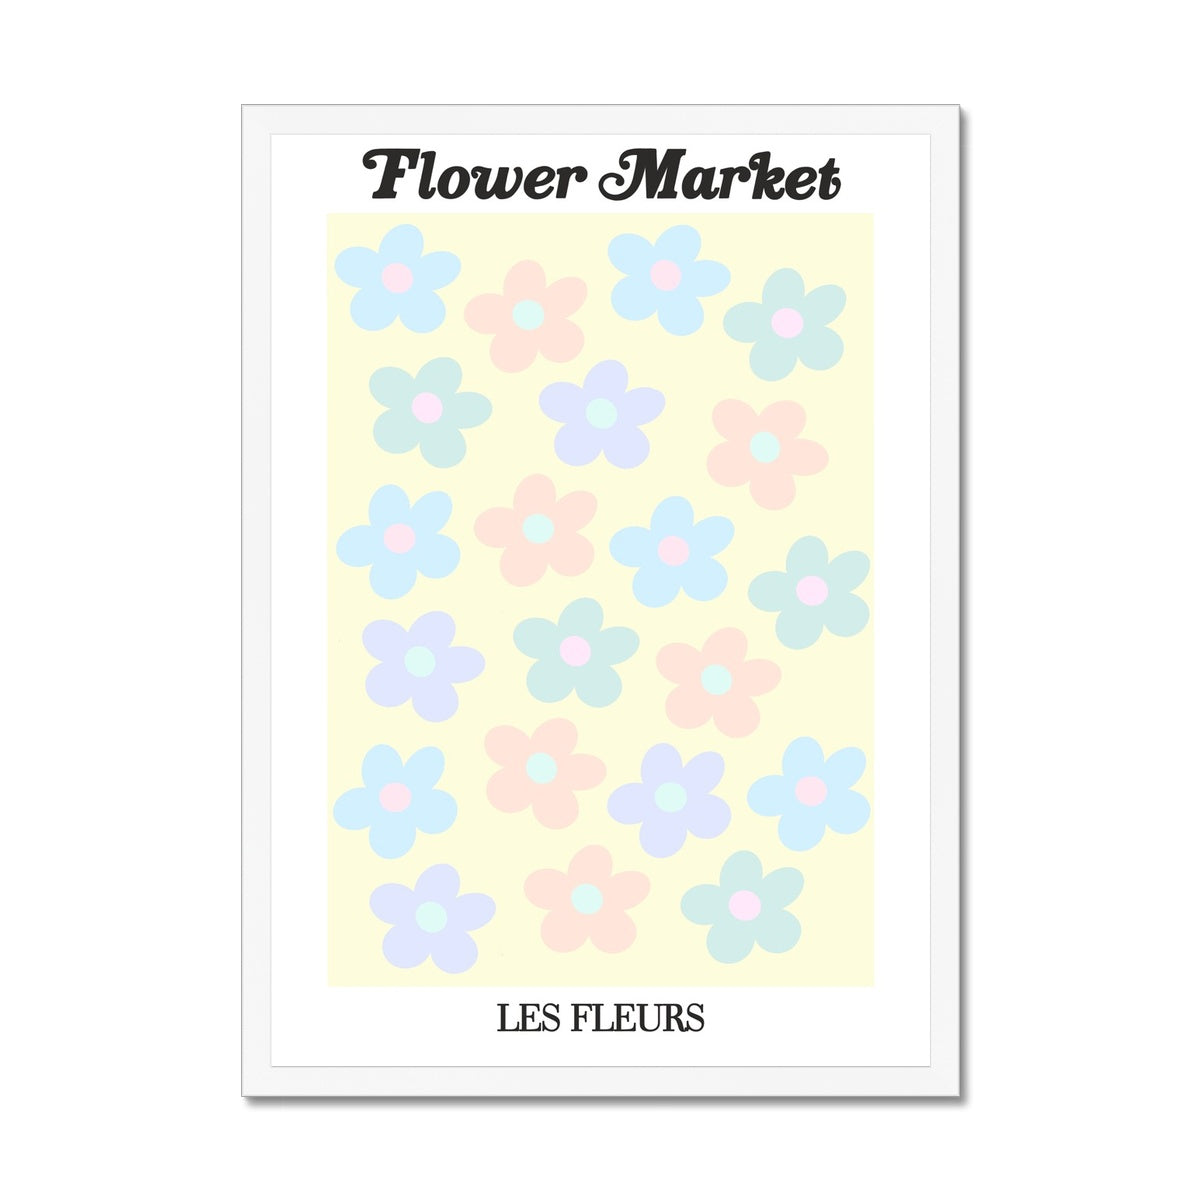 © les muses / Our Flower Market / Les Fleurs collection features wall art with a vibrant daisy design under original hand drawn typography. Danish pastel posters full of daisies to brighten up any gallery wall.
